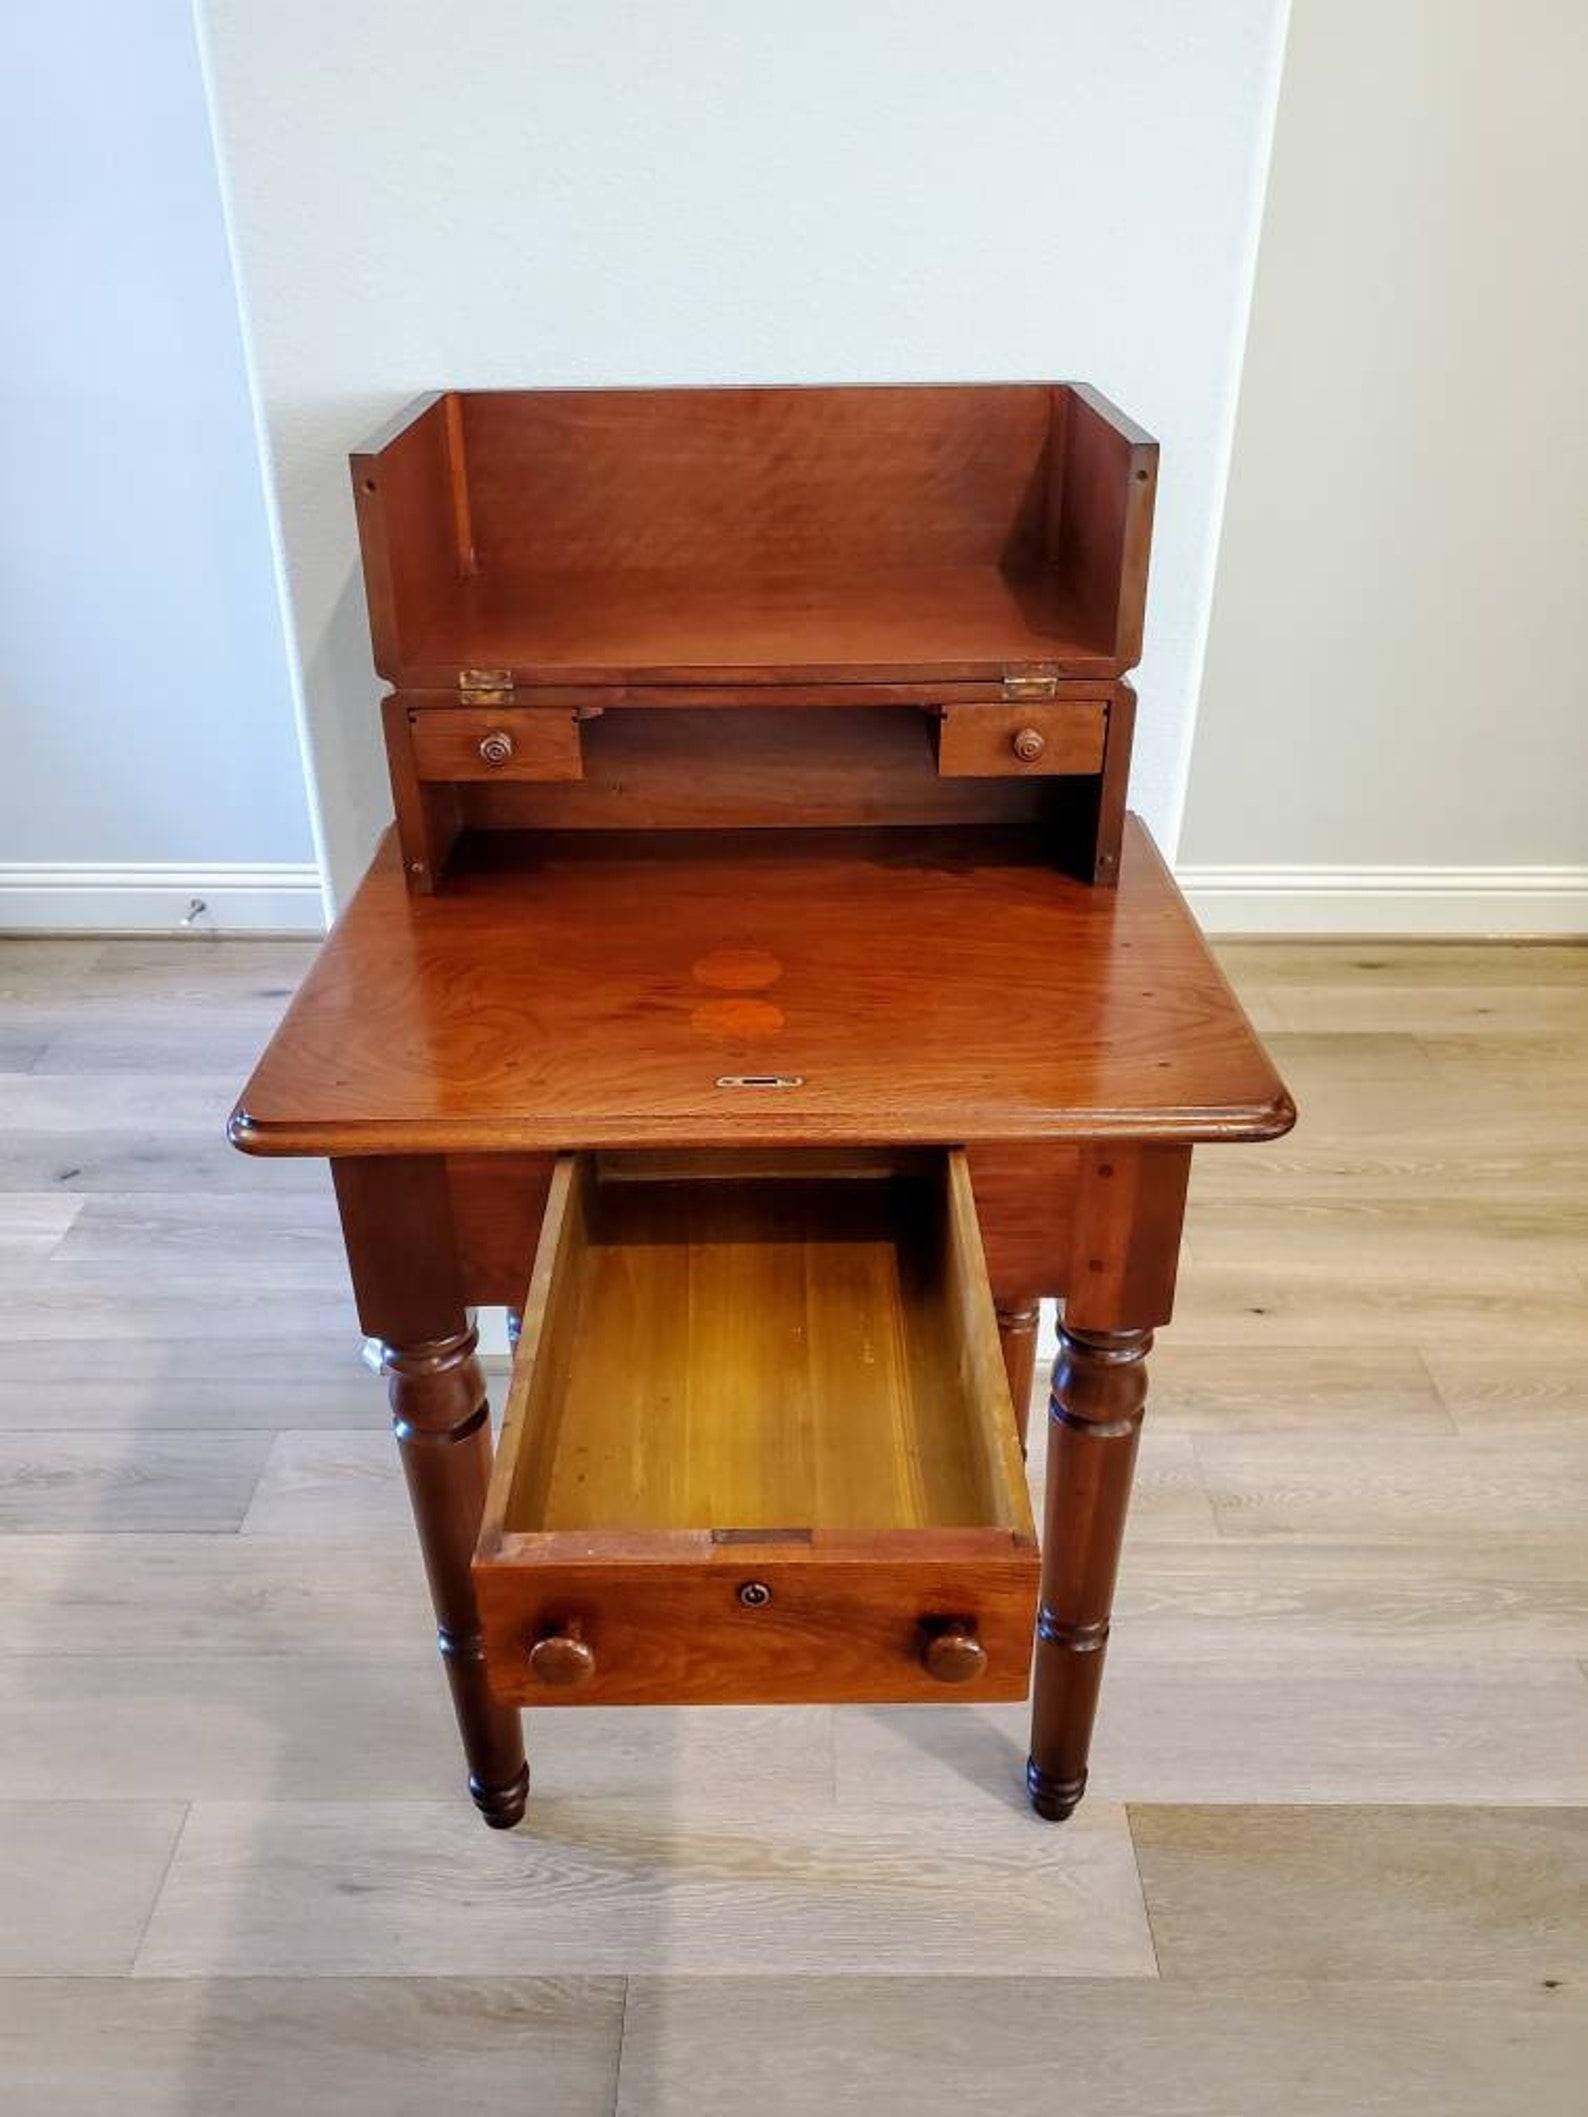 Early 19th Century American Sheraton Mahogany Campaign Officers Desk In Good Condition For Sale In Forney, TX